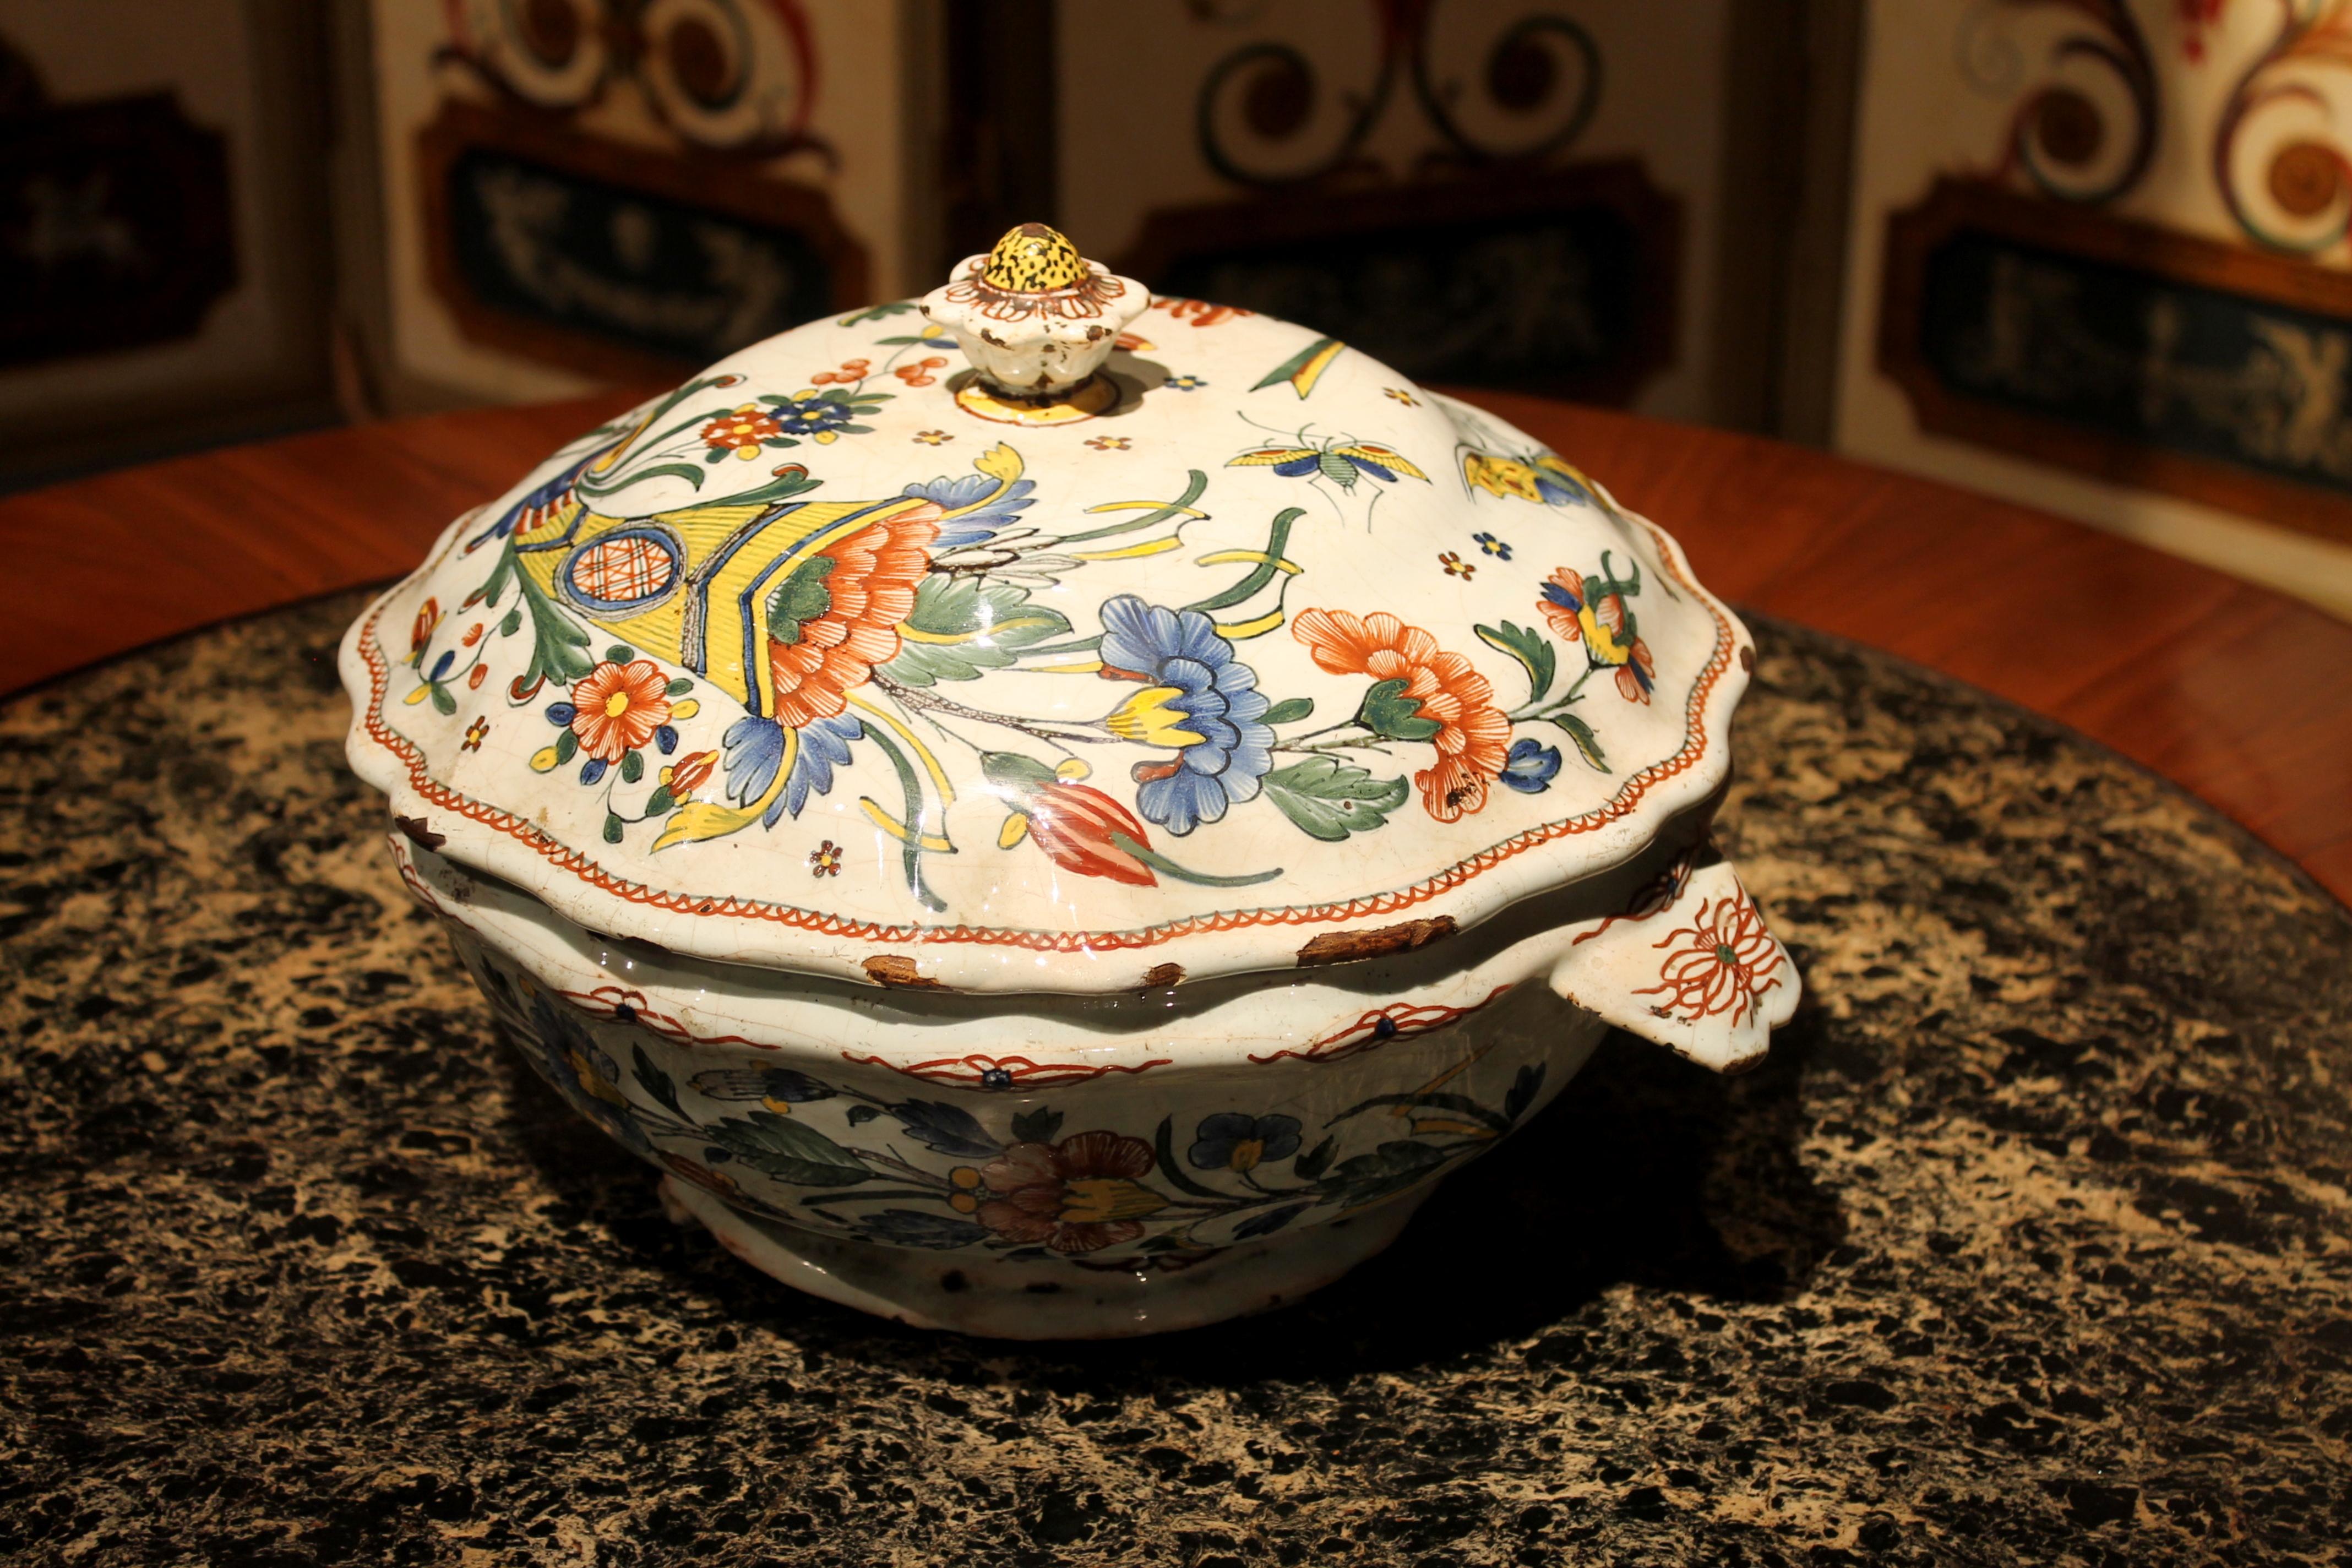 Rococo Antique French Faience Lidded Bowl Tureen Hand Painted with Flowers and Insects For Sale